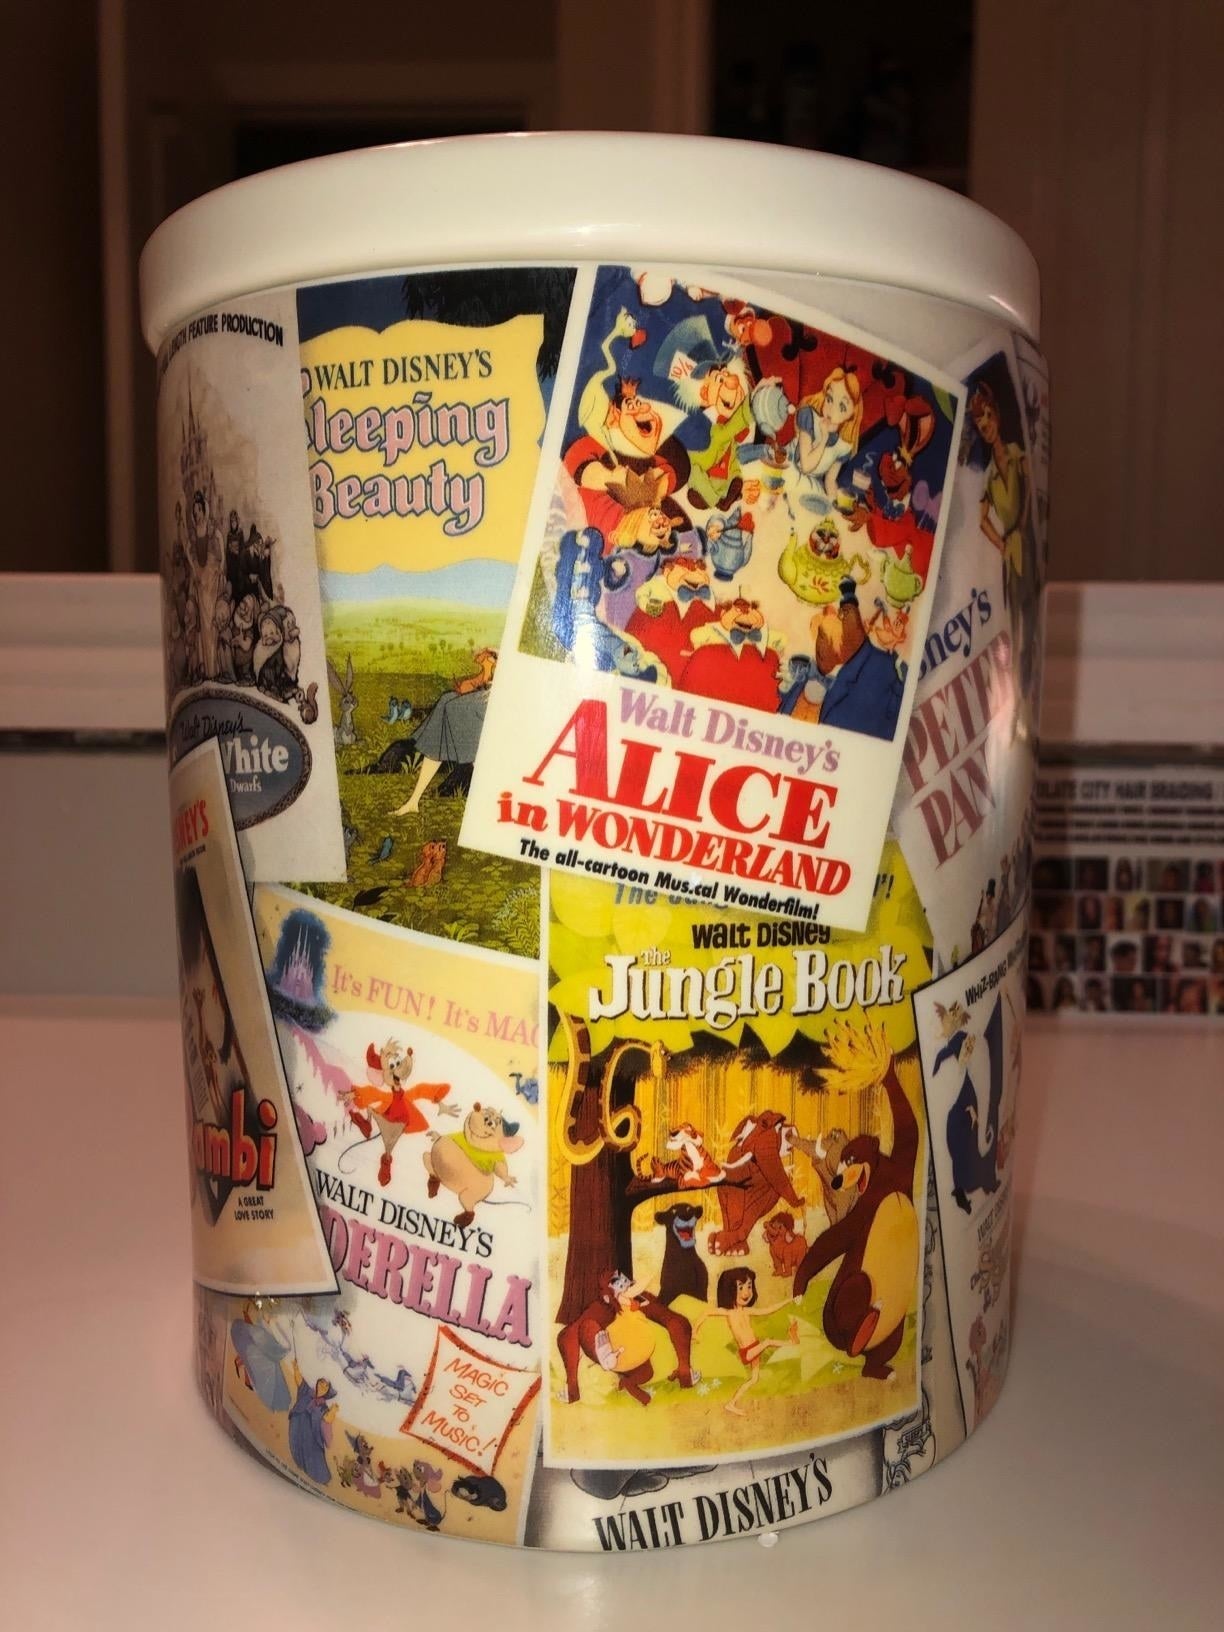 15 Disney Kitchen Gadgets To Cook Up Some Magical Fun - The Farm Girl Gabs®